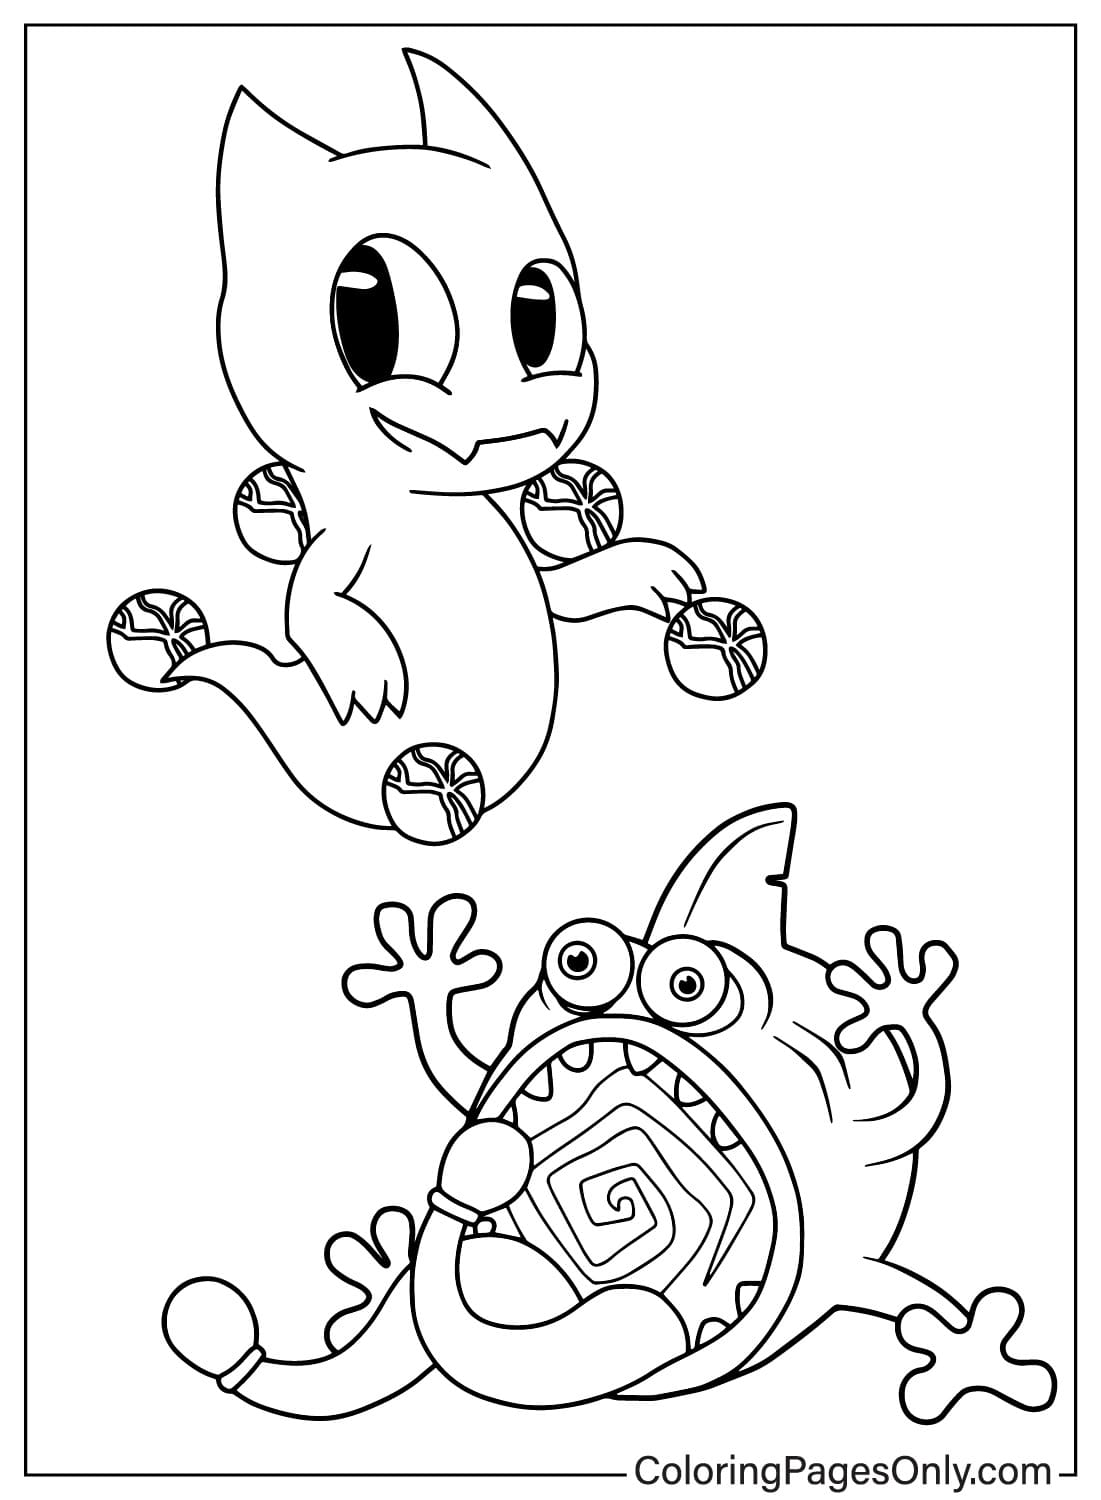 Pictures Ghazt Coloring Page from Ghazt